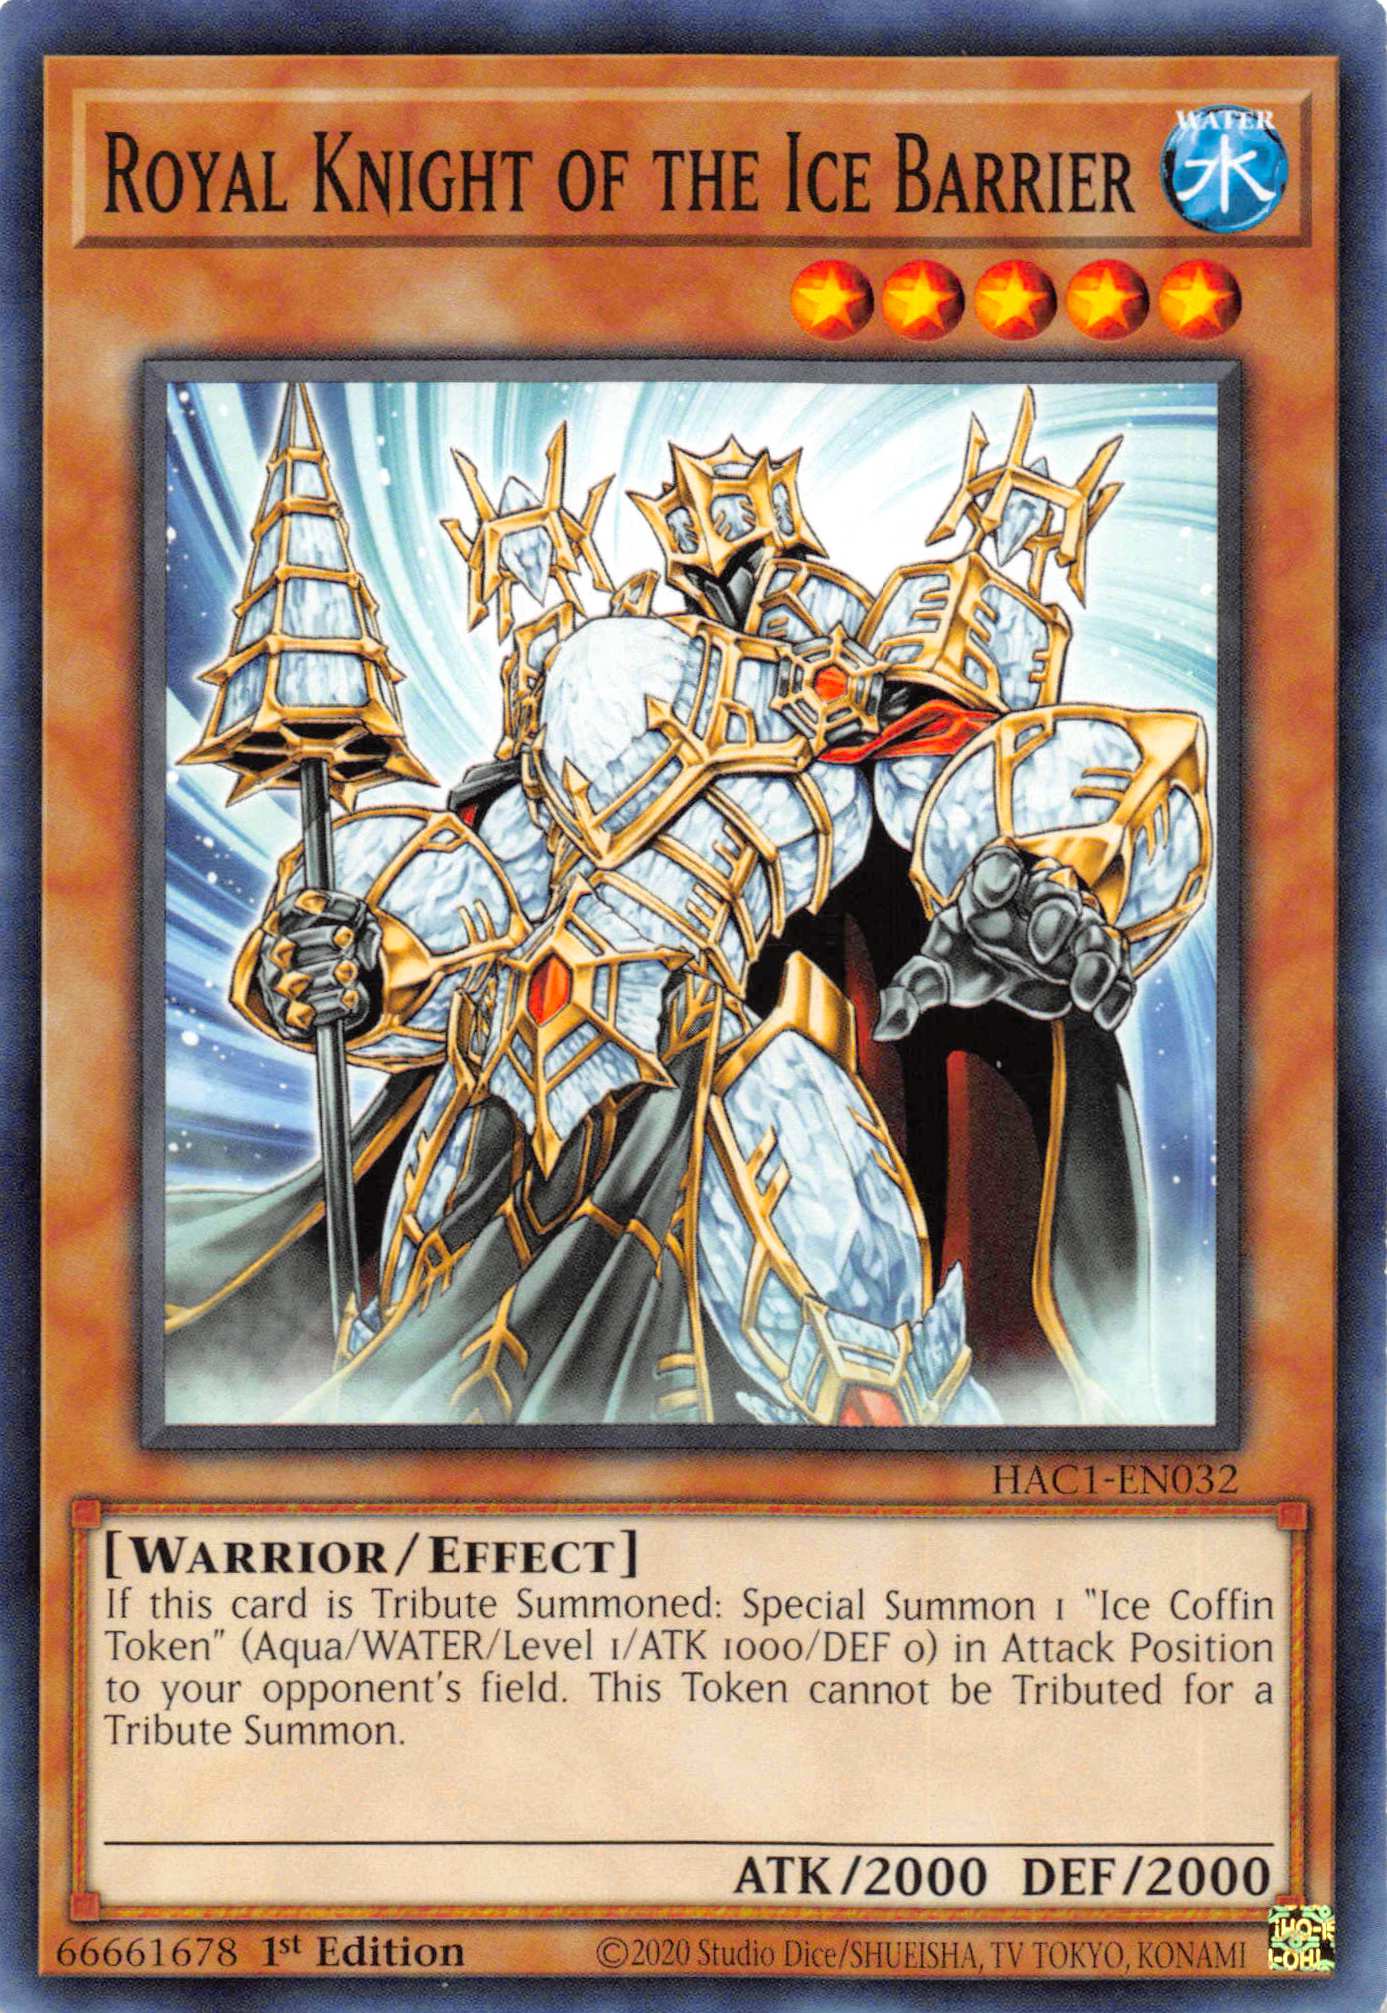 Royal Knight of the Ice Barrier (Duel Terminal) [HAC1-EN032] Parallel Rare | The CG Realm